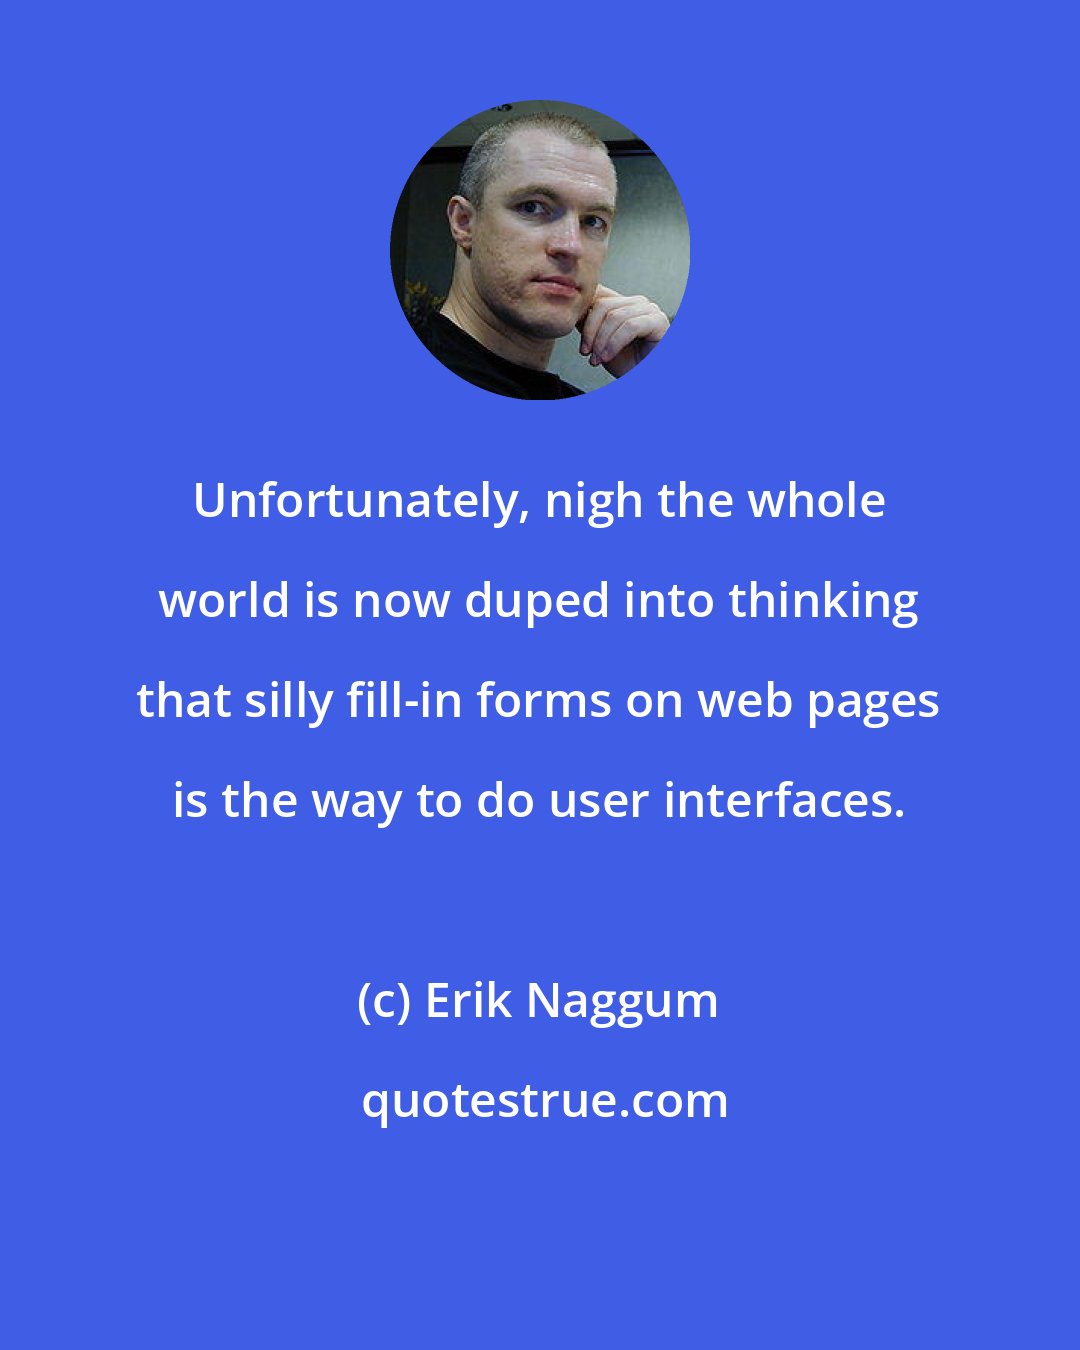 Erik Naggum: Unfortunately, nigh the whole world is now duped into thinking that silly fill-in forms on web pages is the way to do user interfaces.